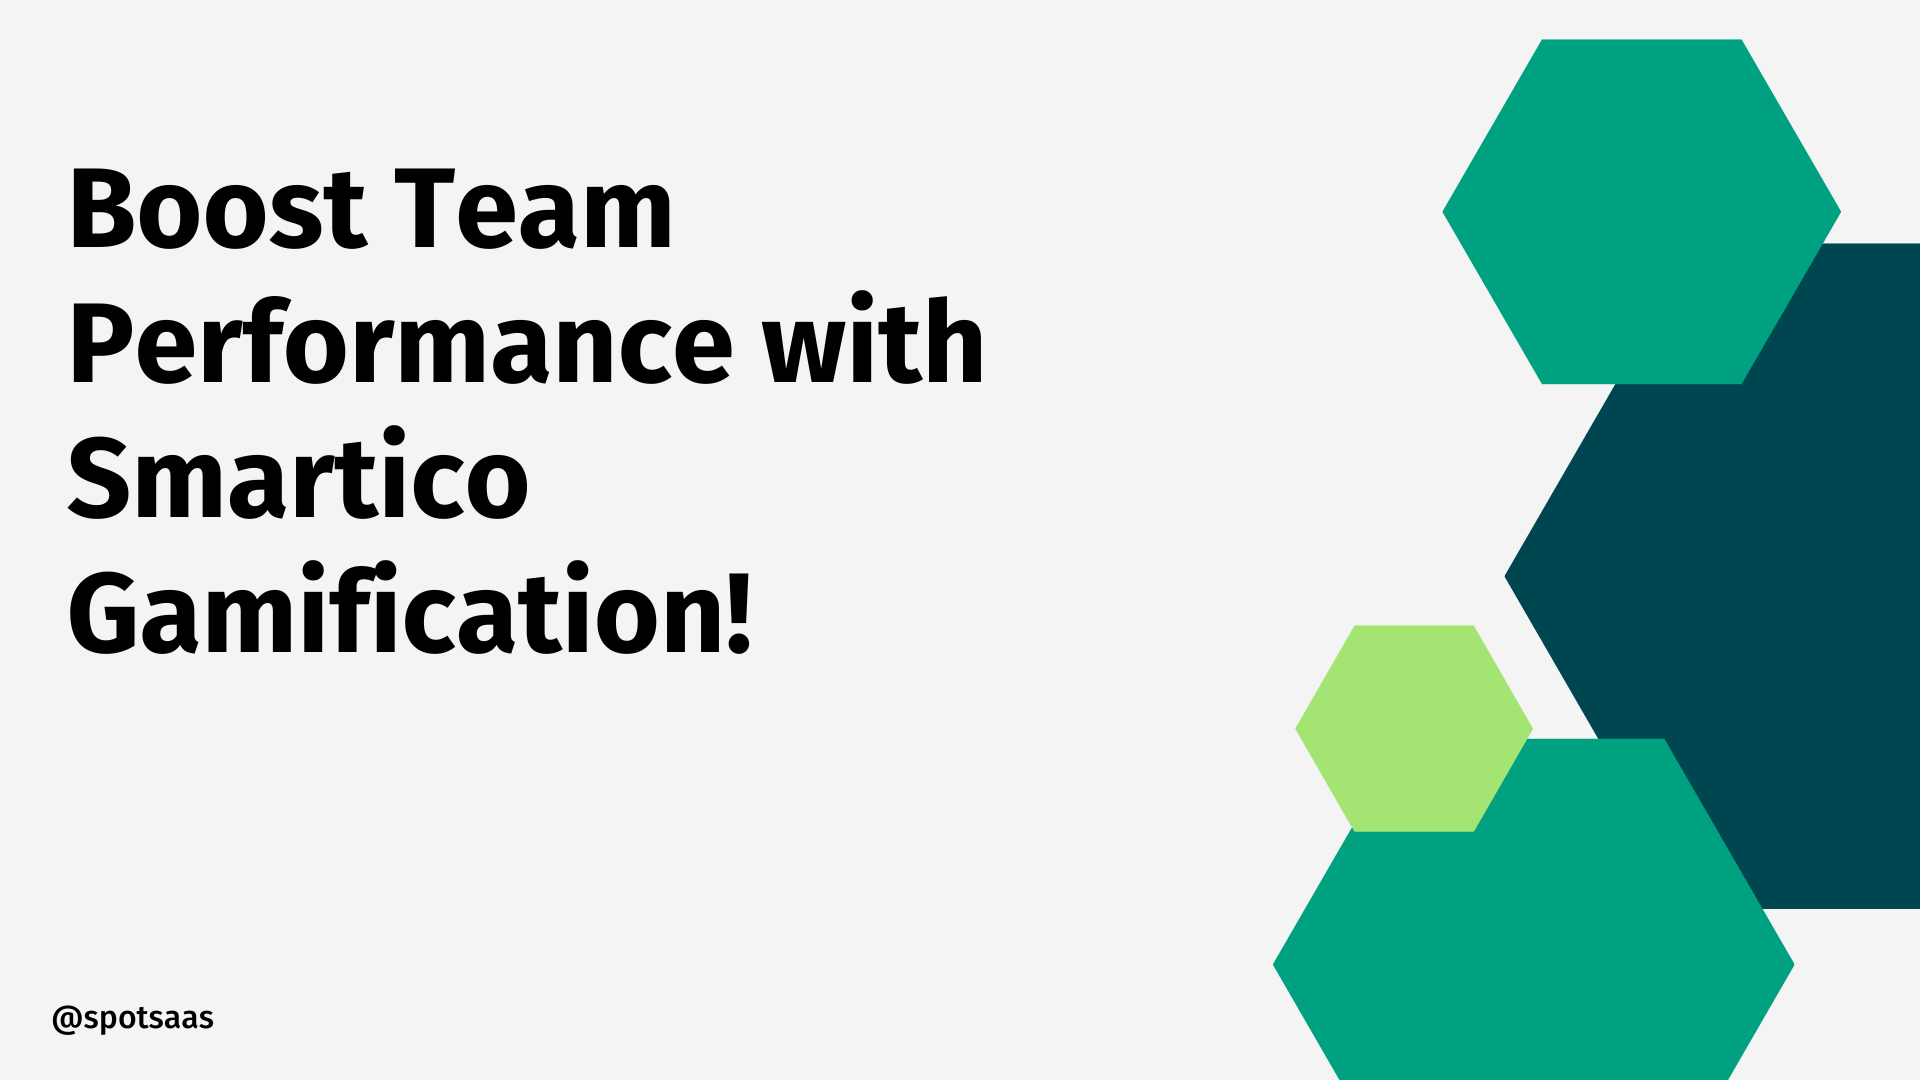 Supercharge Your Team's Performance With Smartico's Gamification